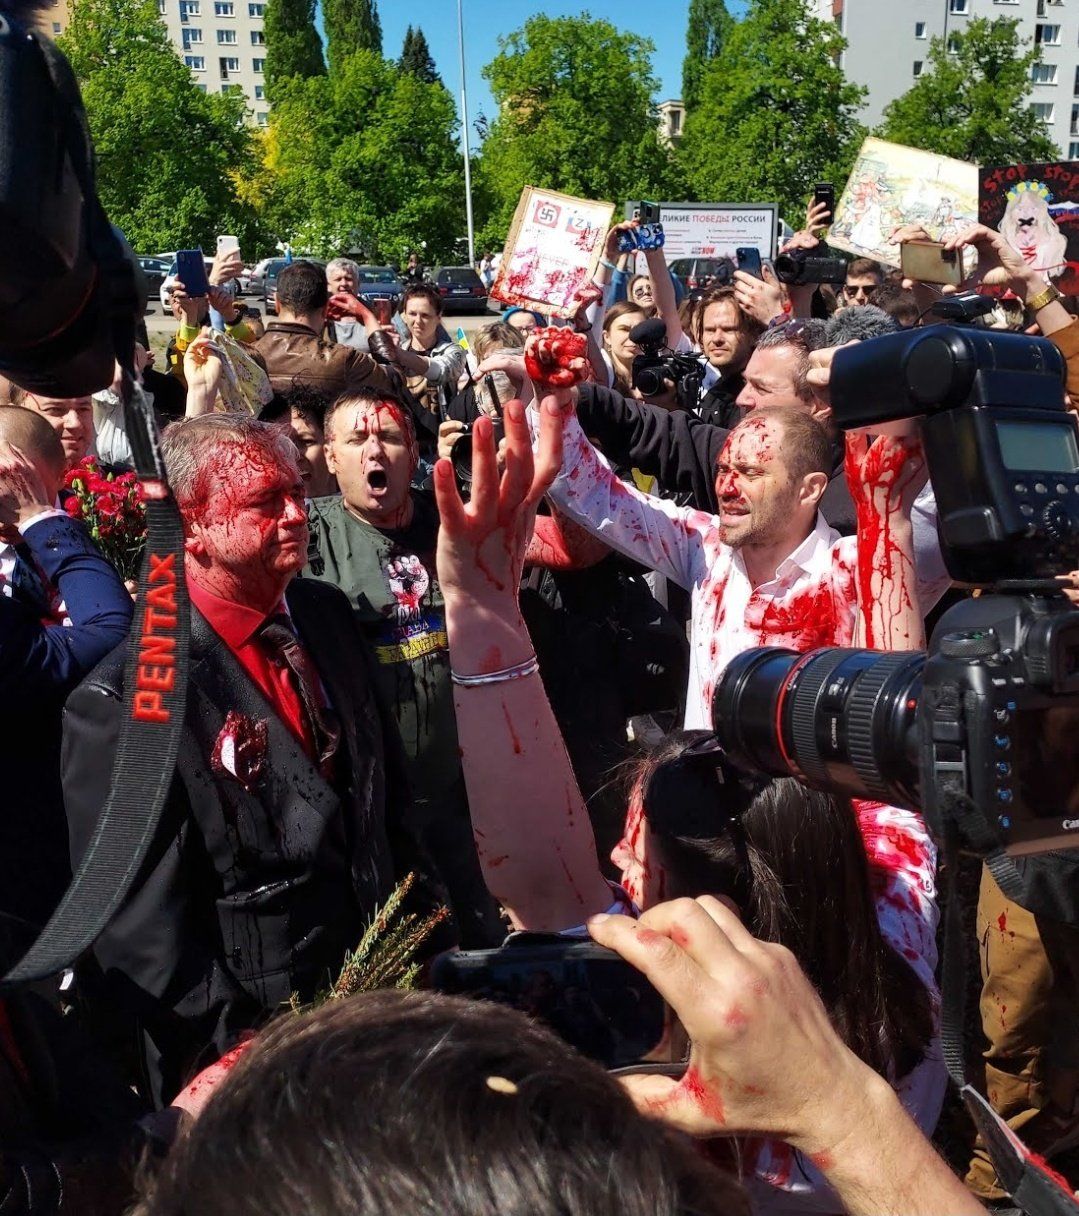 Russian diplomat Sergey Andreev smeared with red paint by protestors. Watch